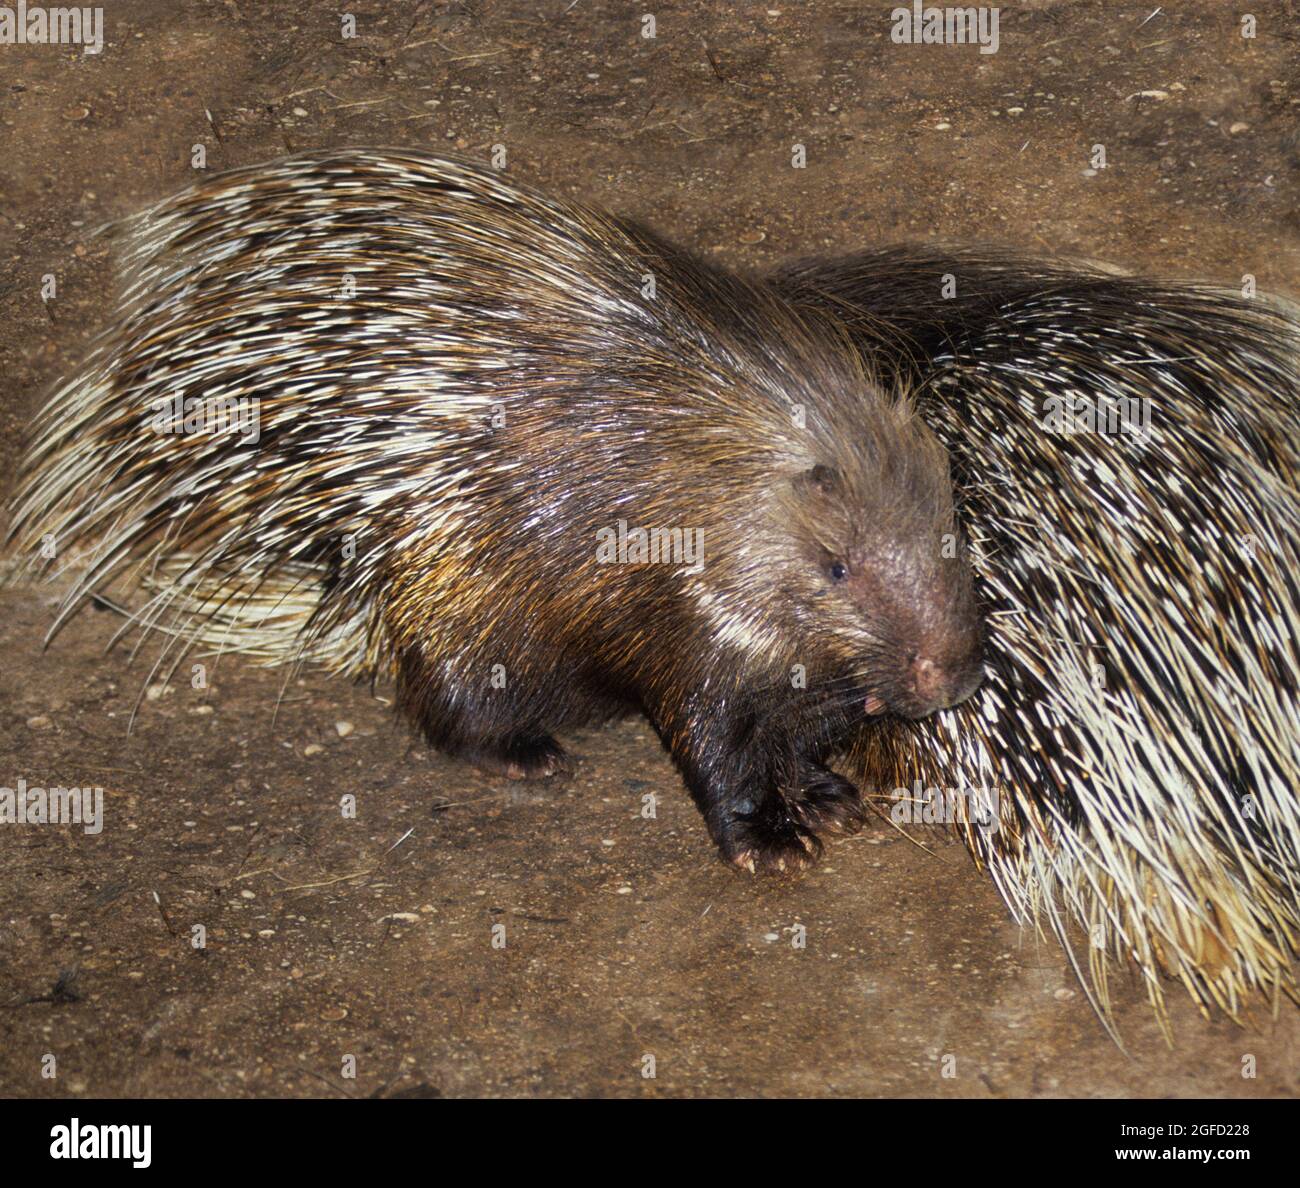 Indian crested porcupine Stock Photo